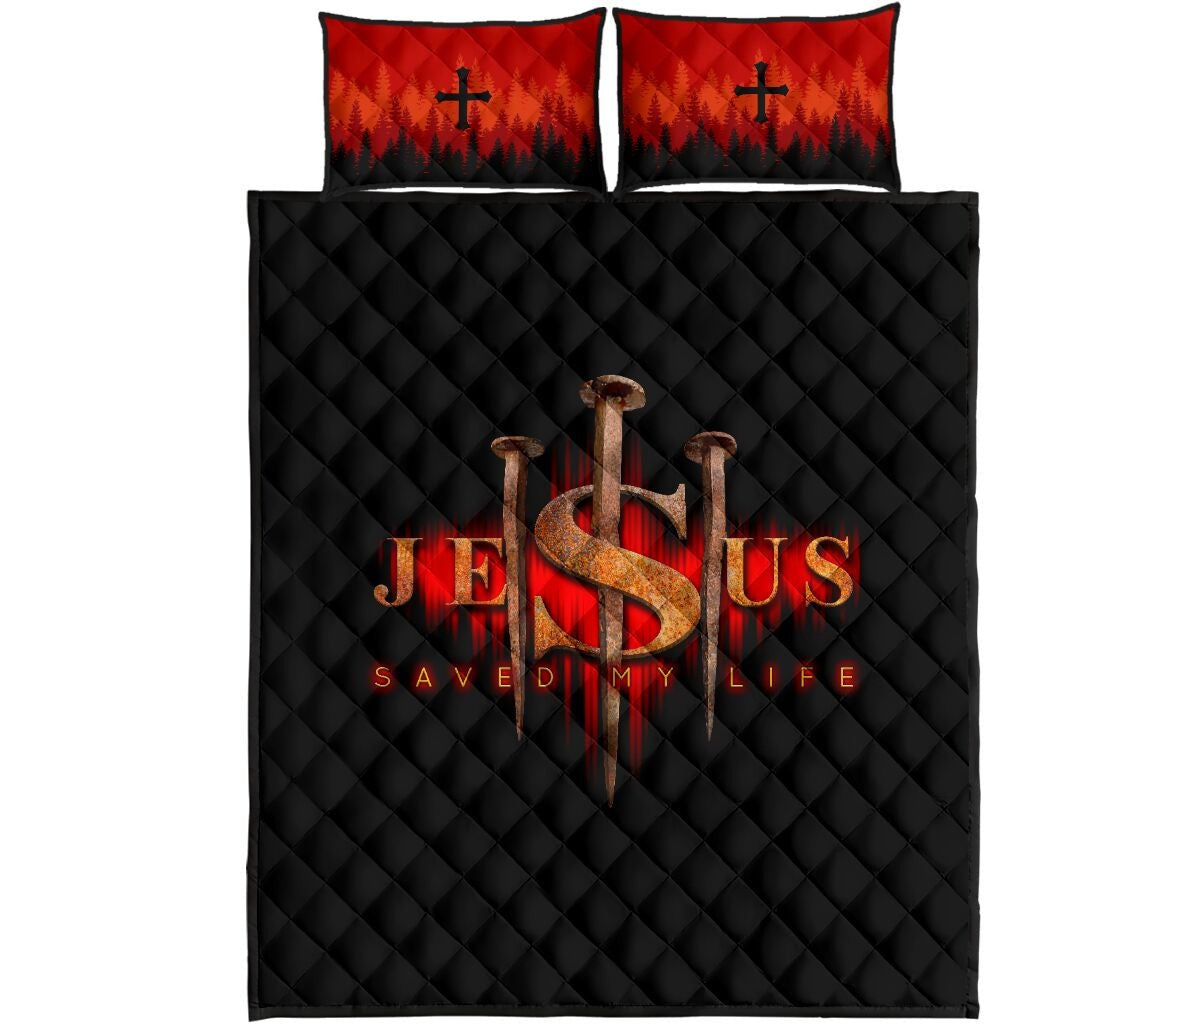 Miracle Keeper Promise Keeper Shirts - Christian Bedding Sets